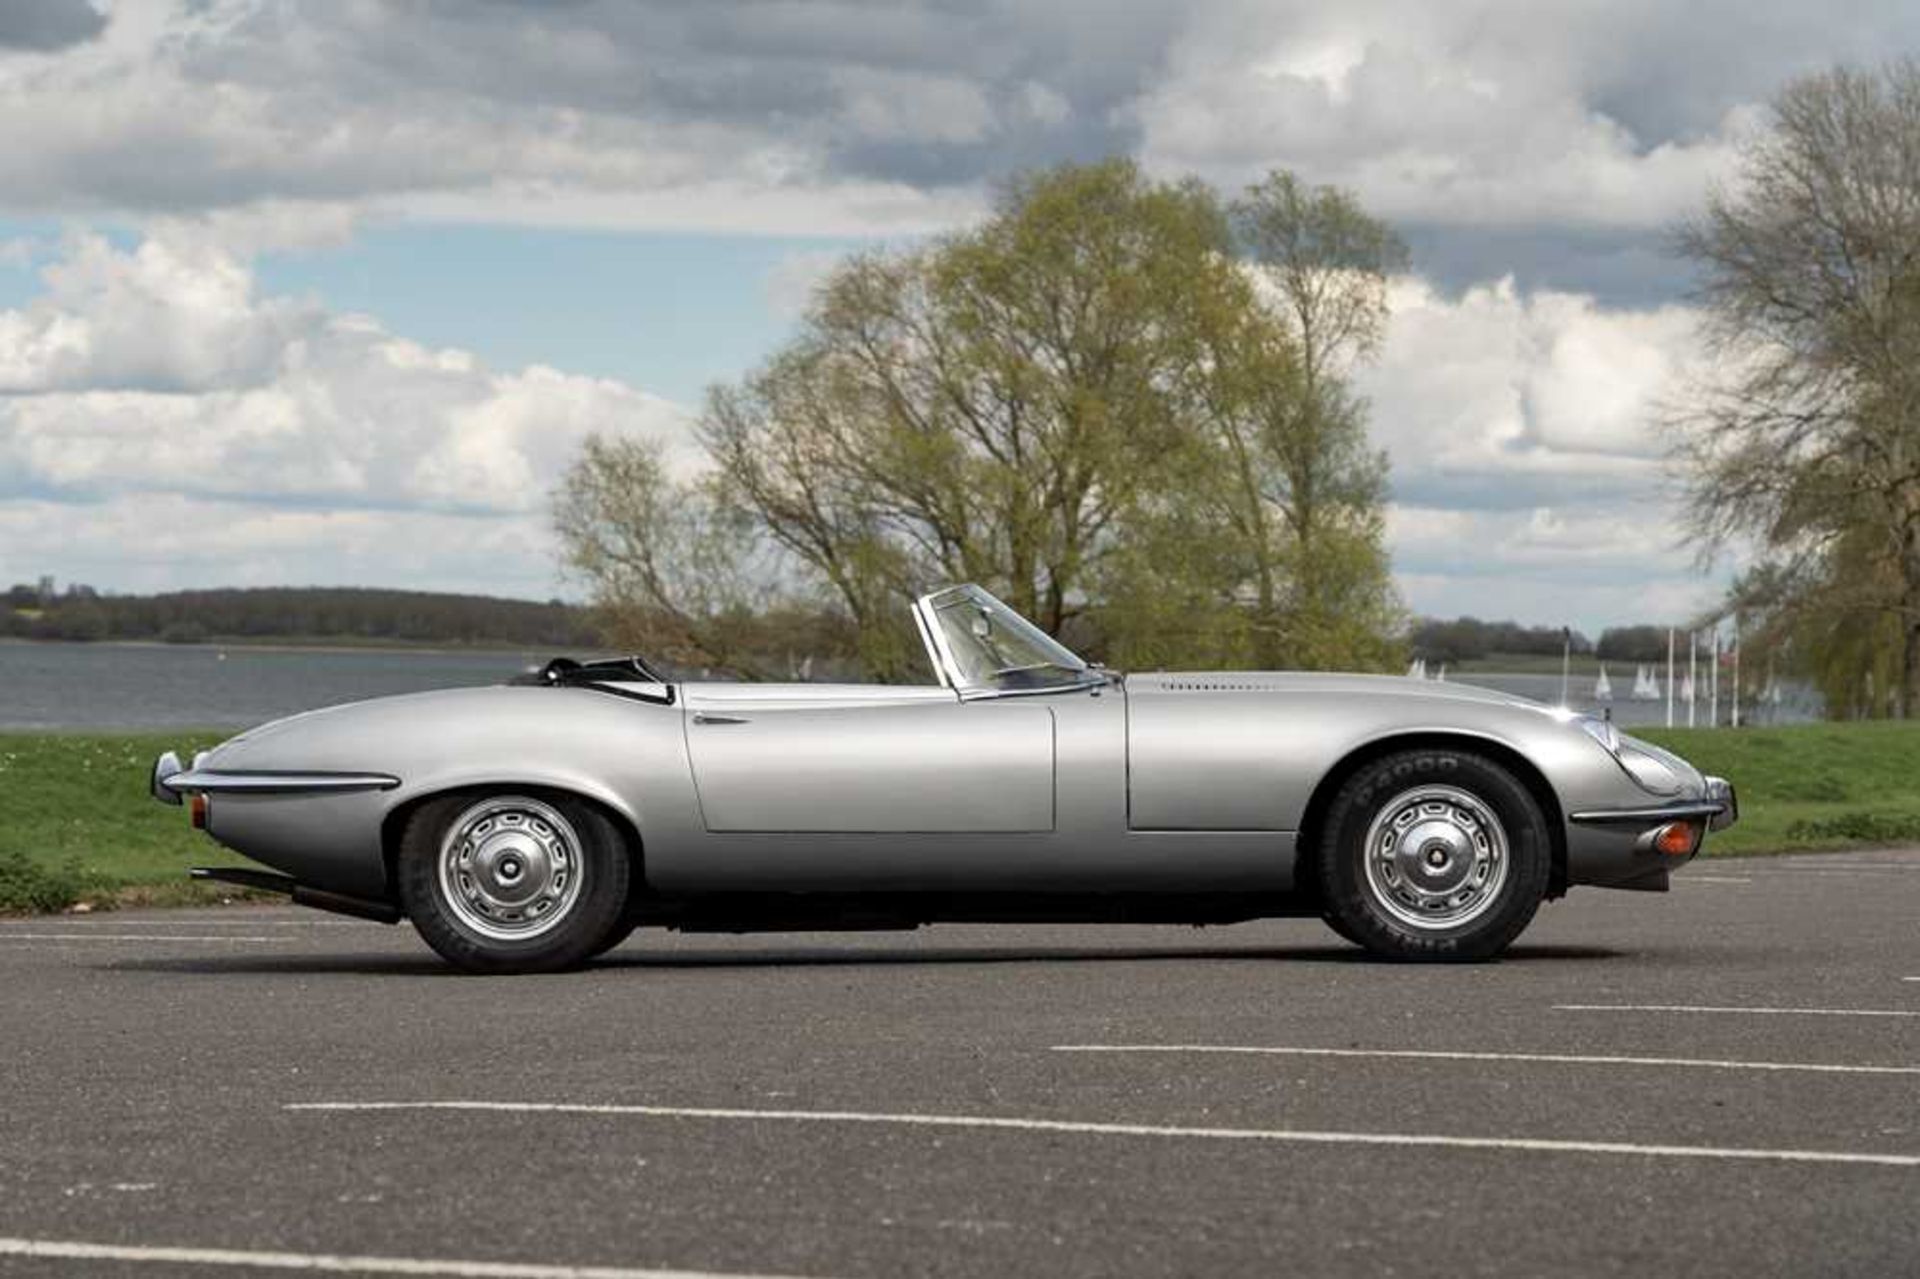 1974 Jaguar E-Type Series III V12 Roadster Only one family owner and 54,412 miles from new - Image 5 of 89